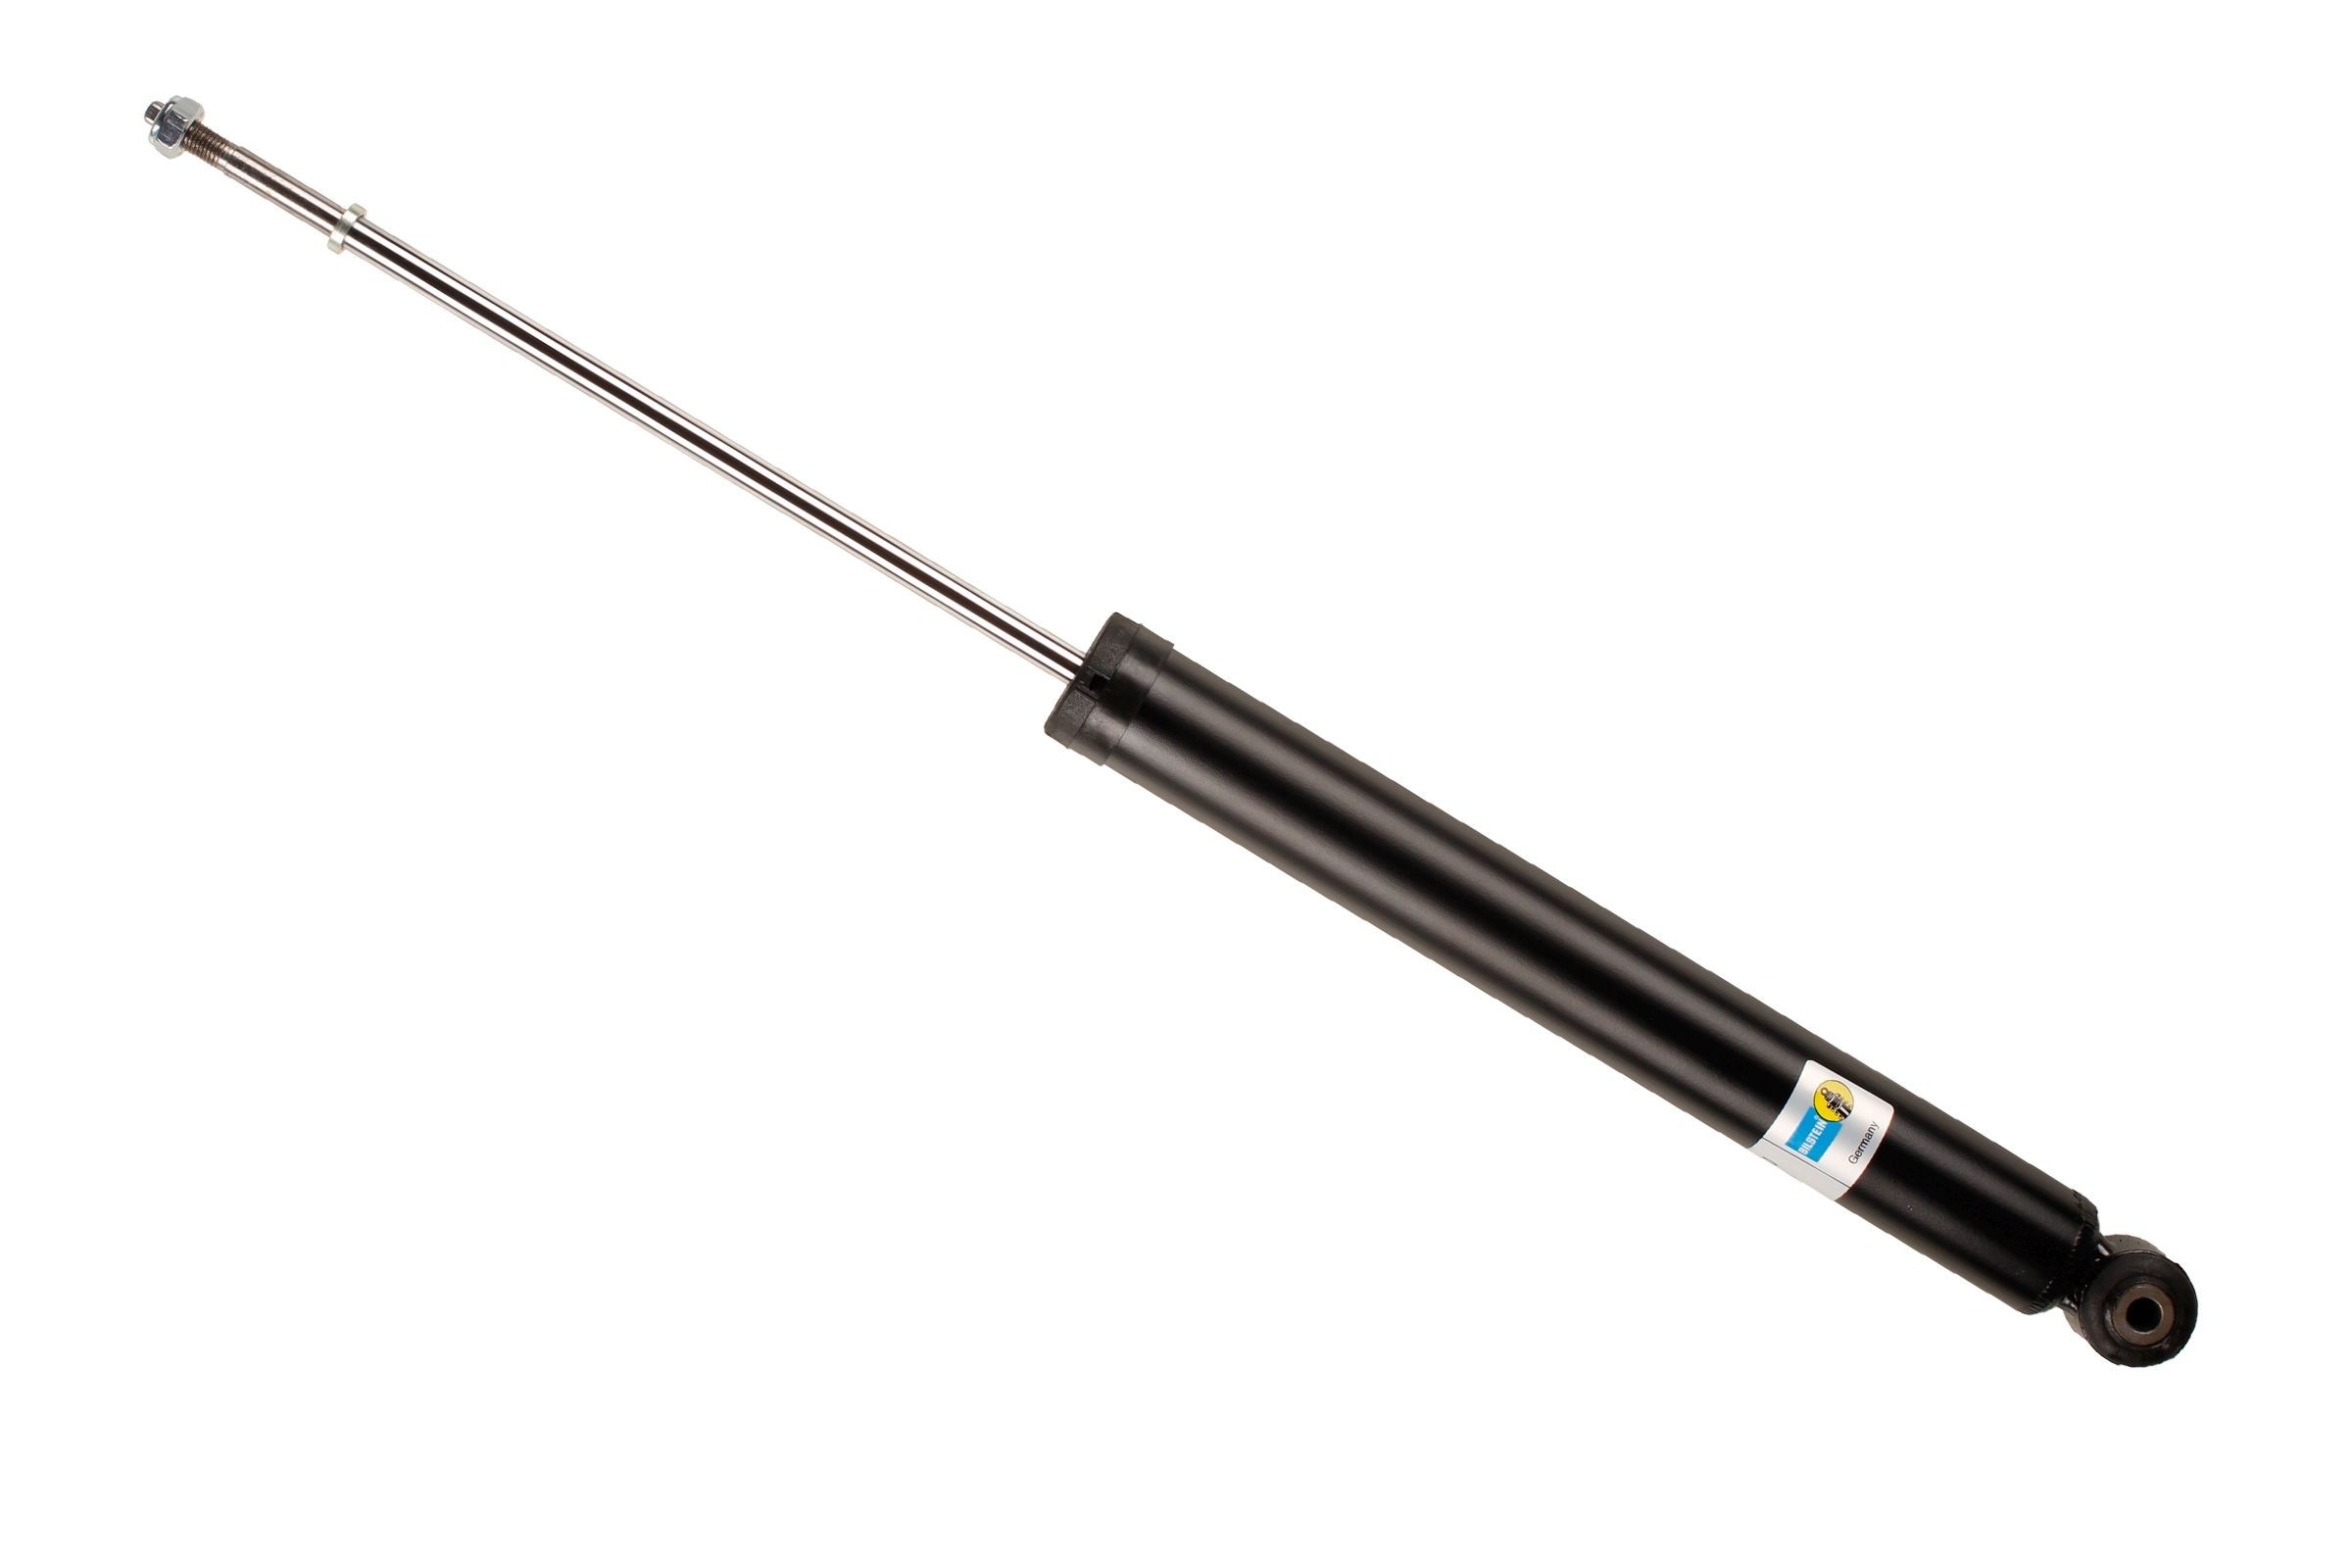 BNE-F815 BILSTEIN - B4 OE Replacement Rear Axle, Gas Pressure, Twin-Tube, Absorber does not carry a spring, Bottom eye, Top pin Shocks 19-158150 buy